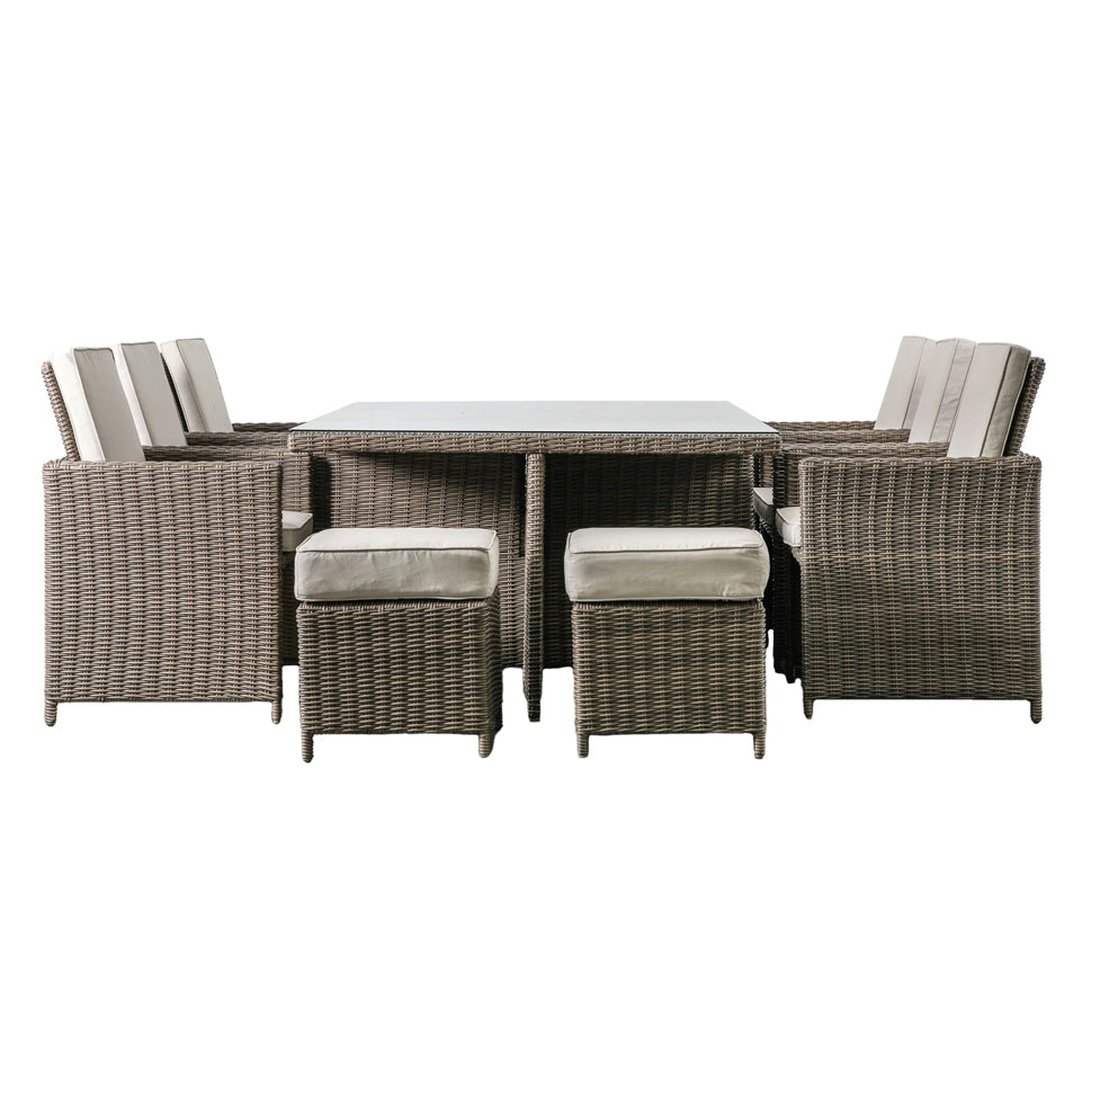 Gallery Outdoor Mileva 10 Seater Cube Dining Set in Natural